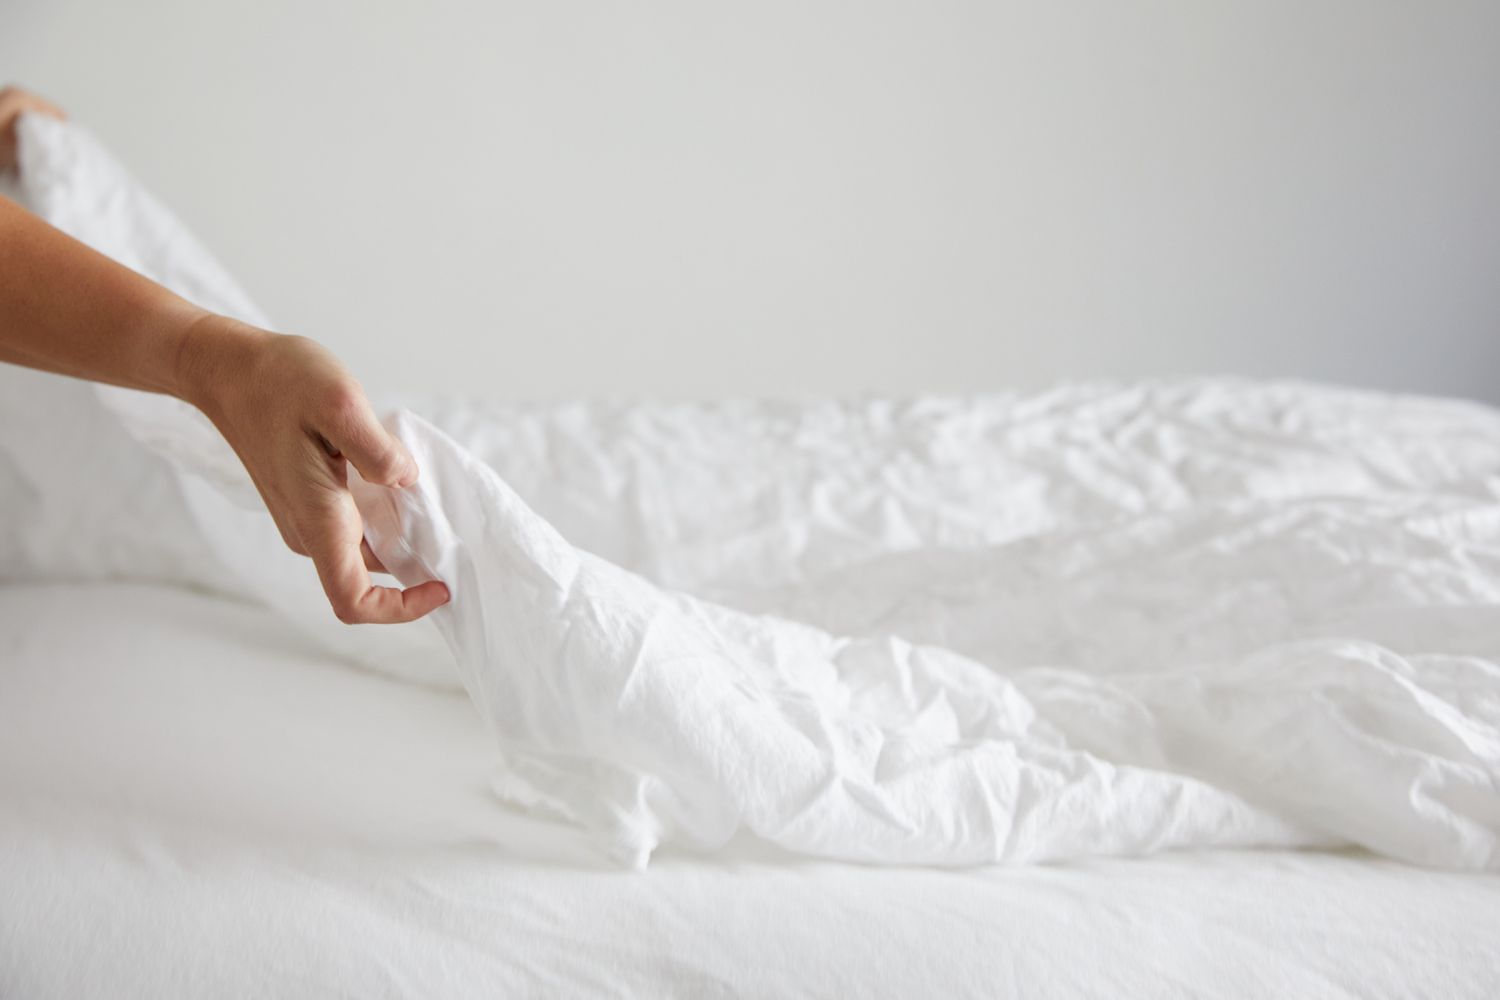 How To Get Wrinkles Out Of Duvet Cover